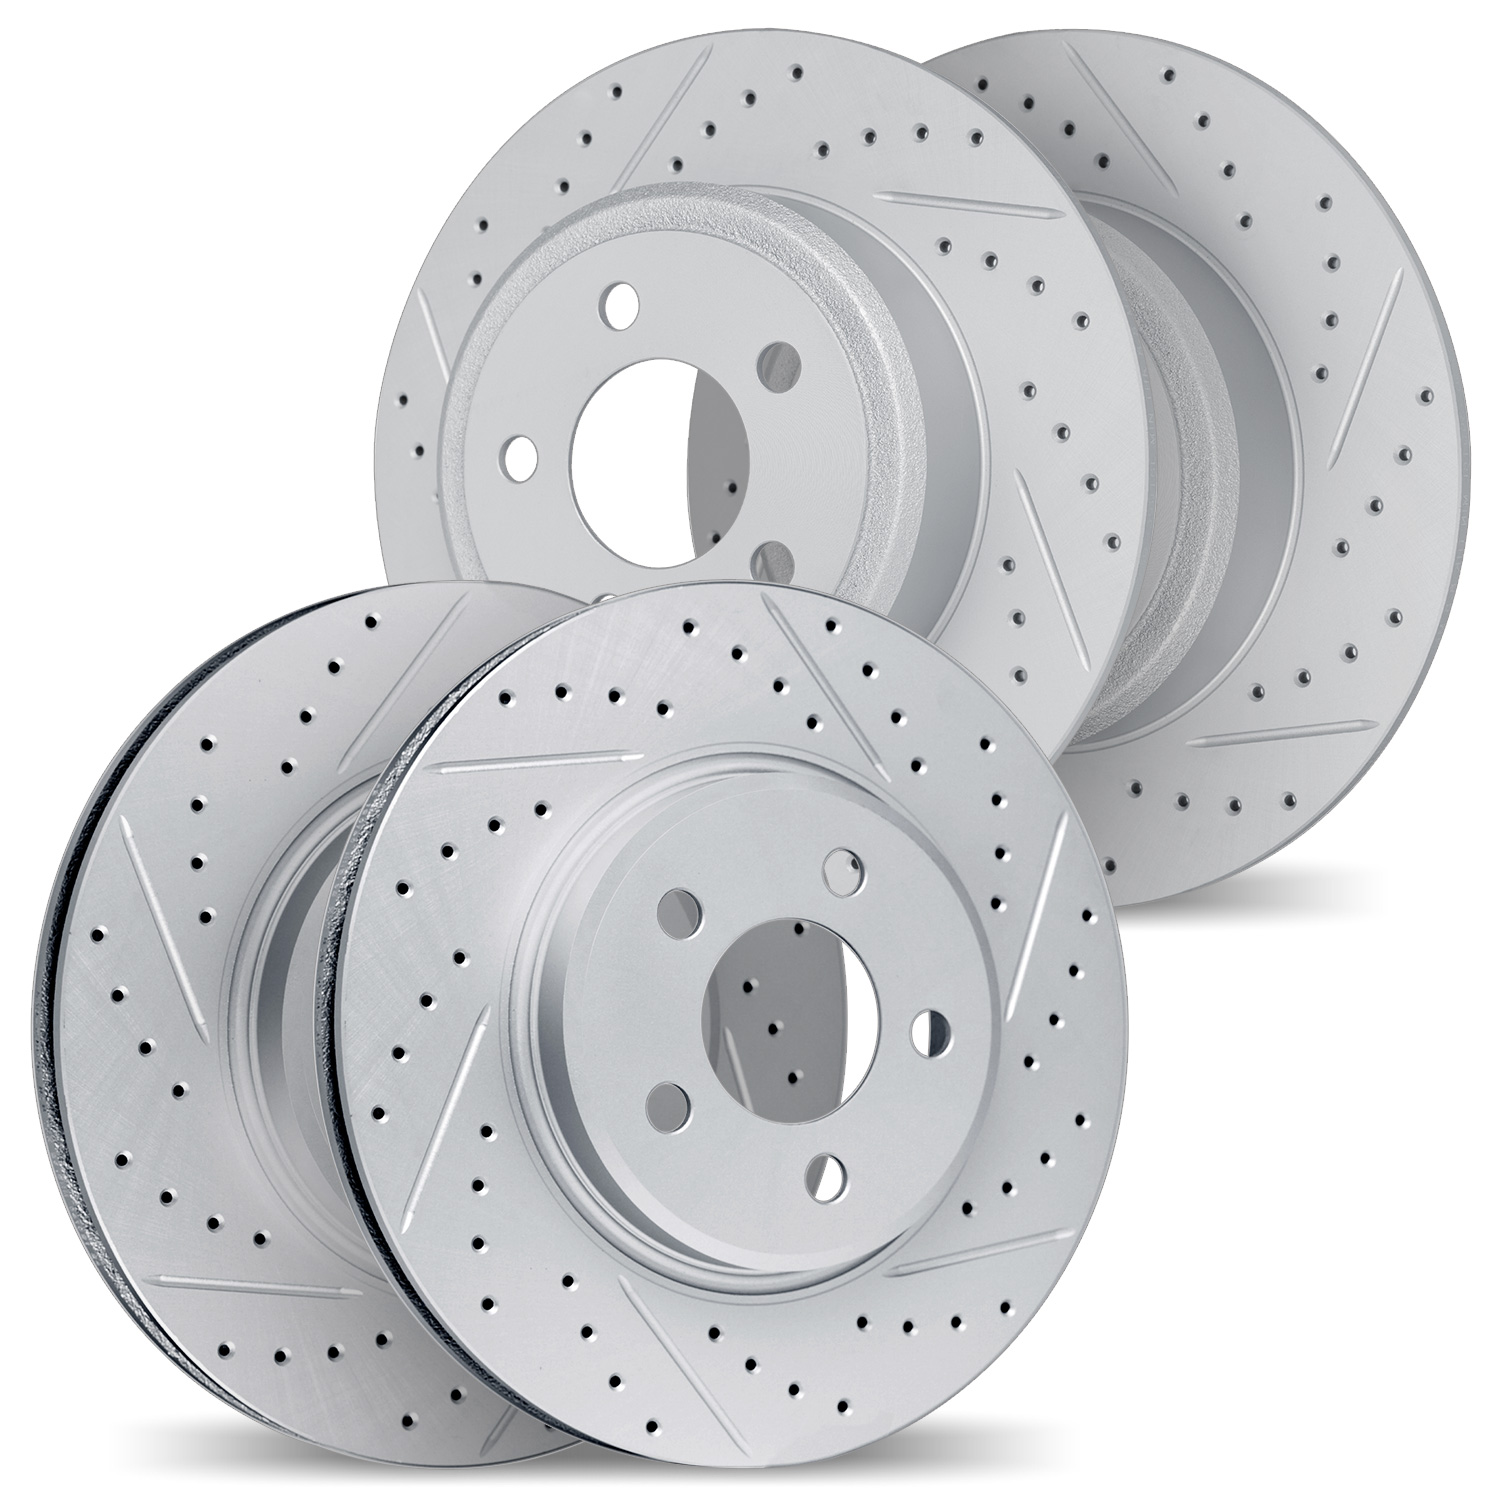 2004-52004 Geoperformance Drilled/Slotted Brake Rotors, 2005-2005 GM, Position: Front and Rear